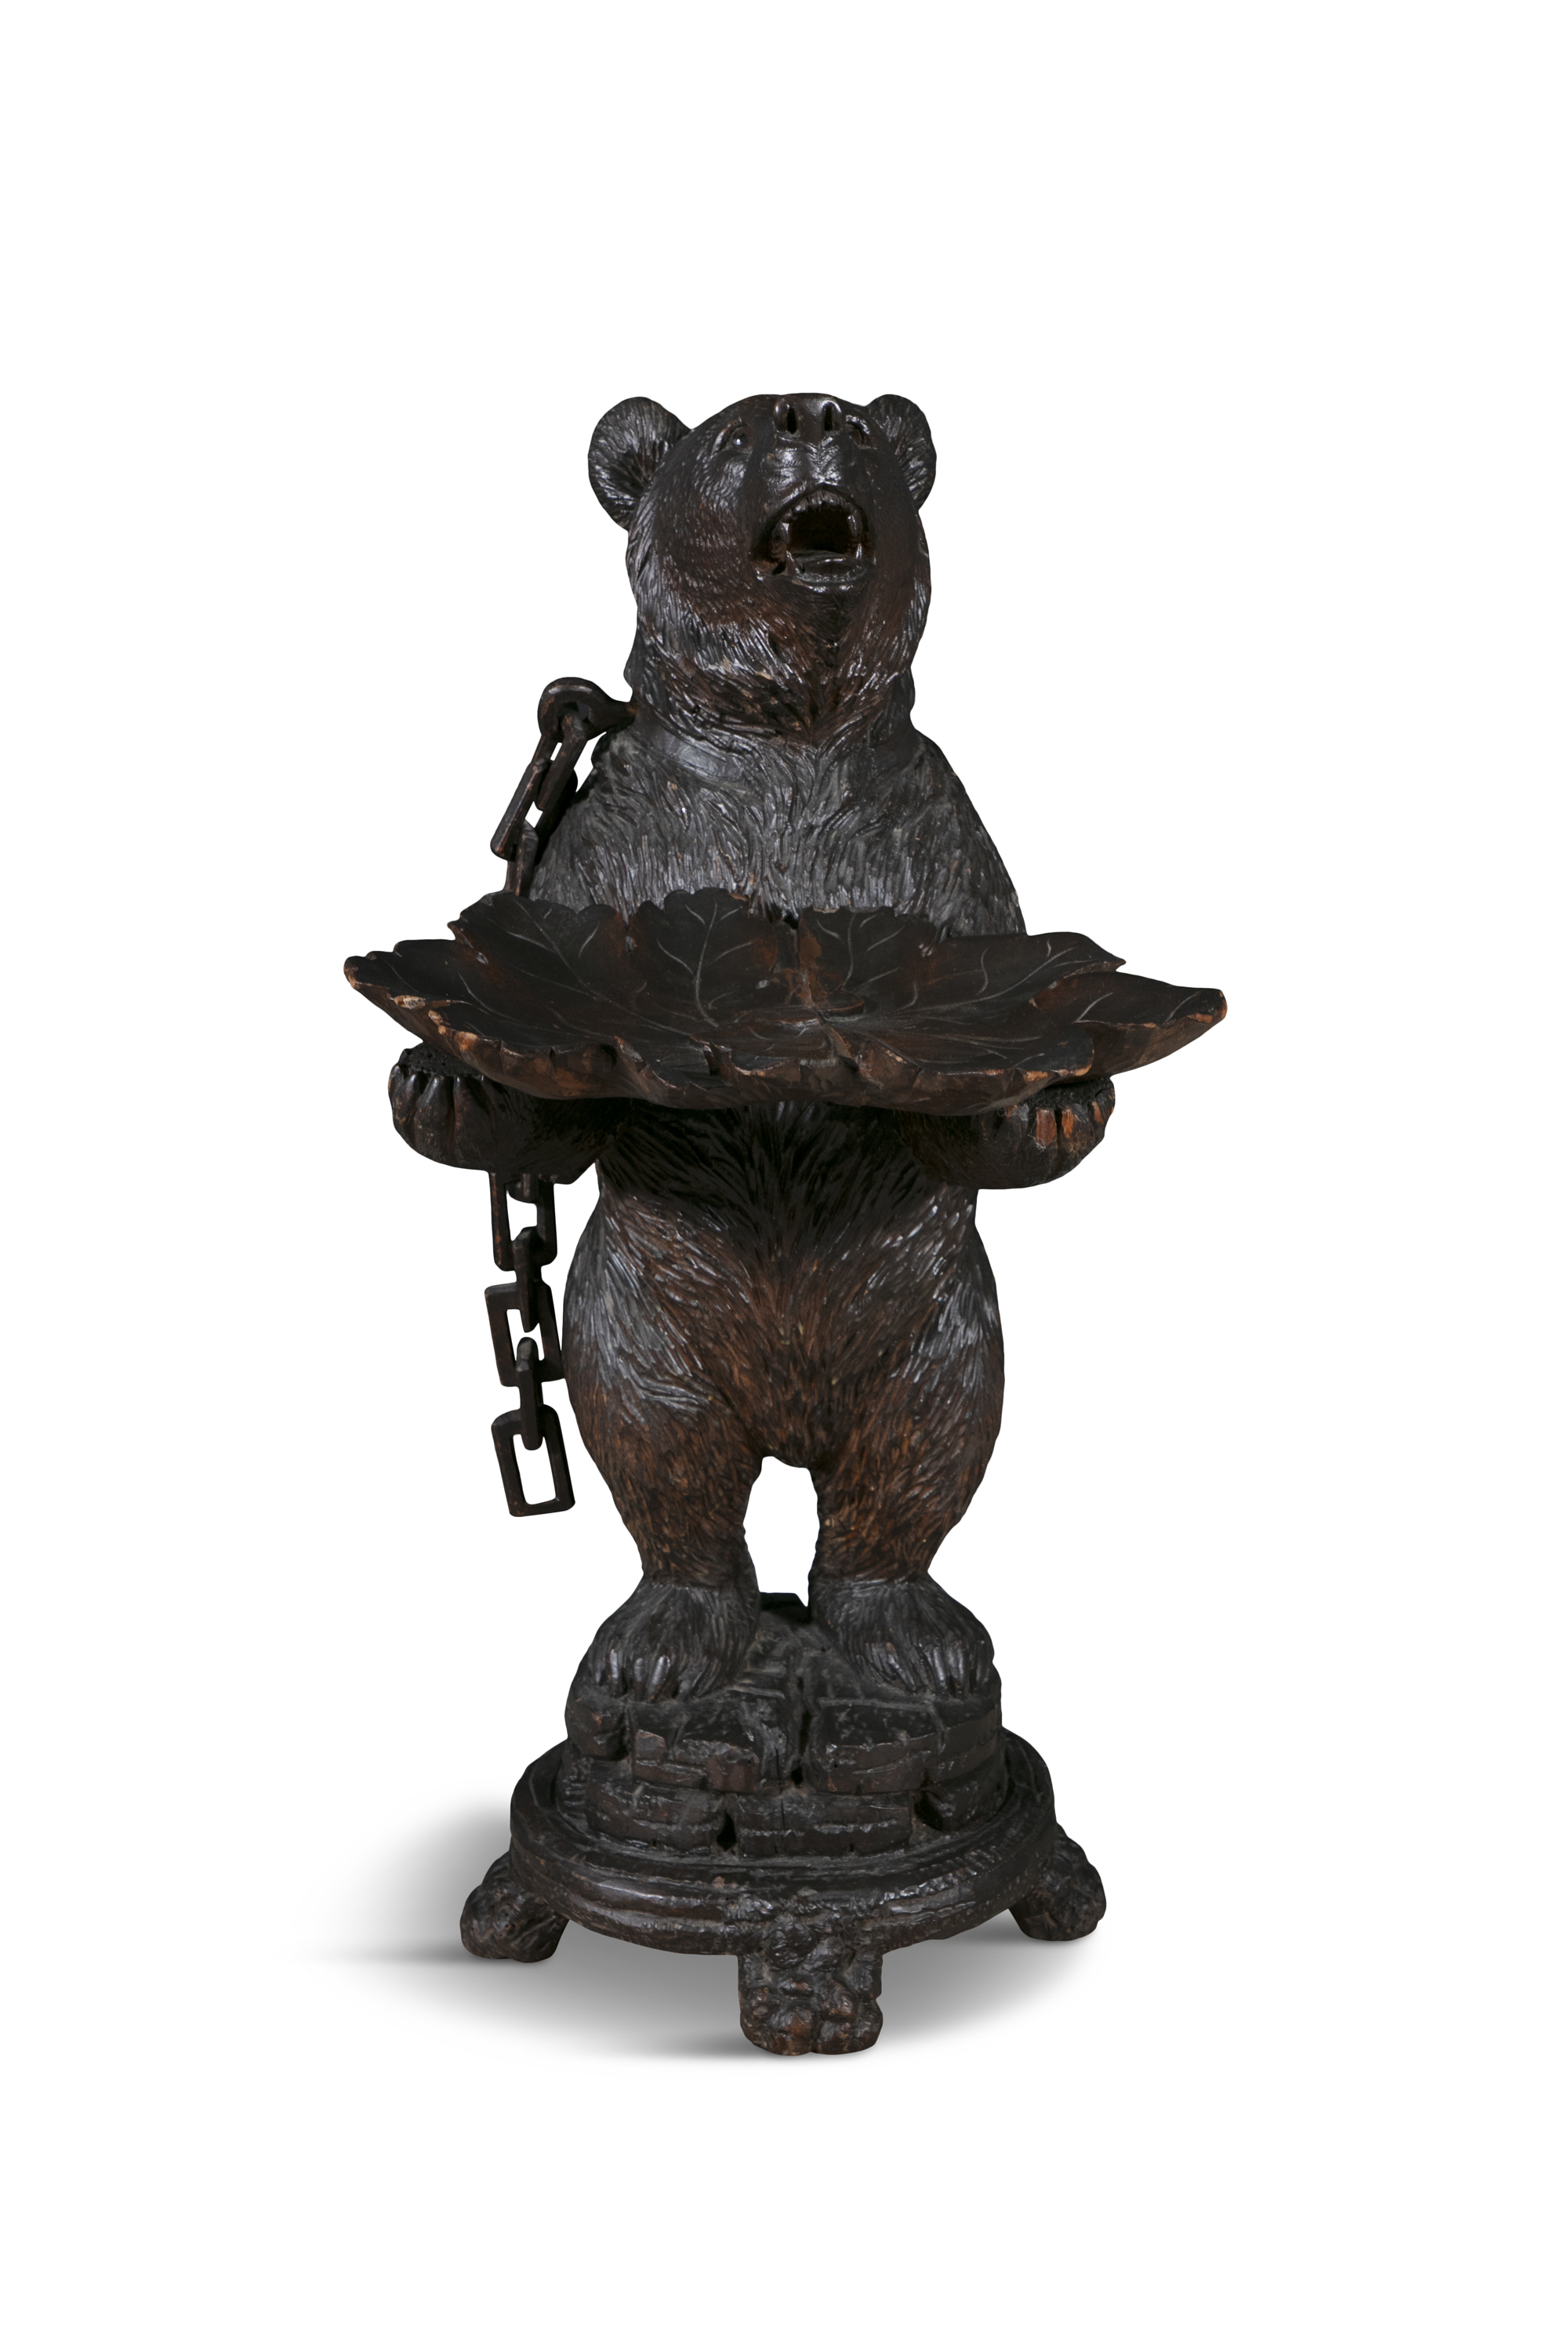 A SWISS 'BLACK FOREST' LINDEN WOOD BEAR, 19TH CENTURY modelled standing upright with